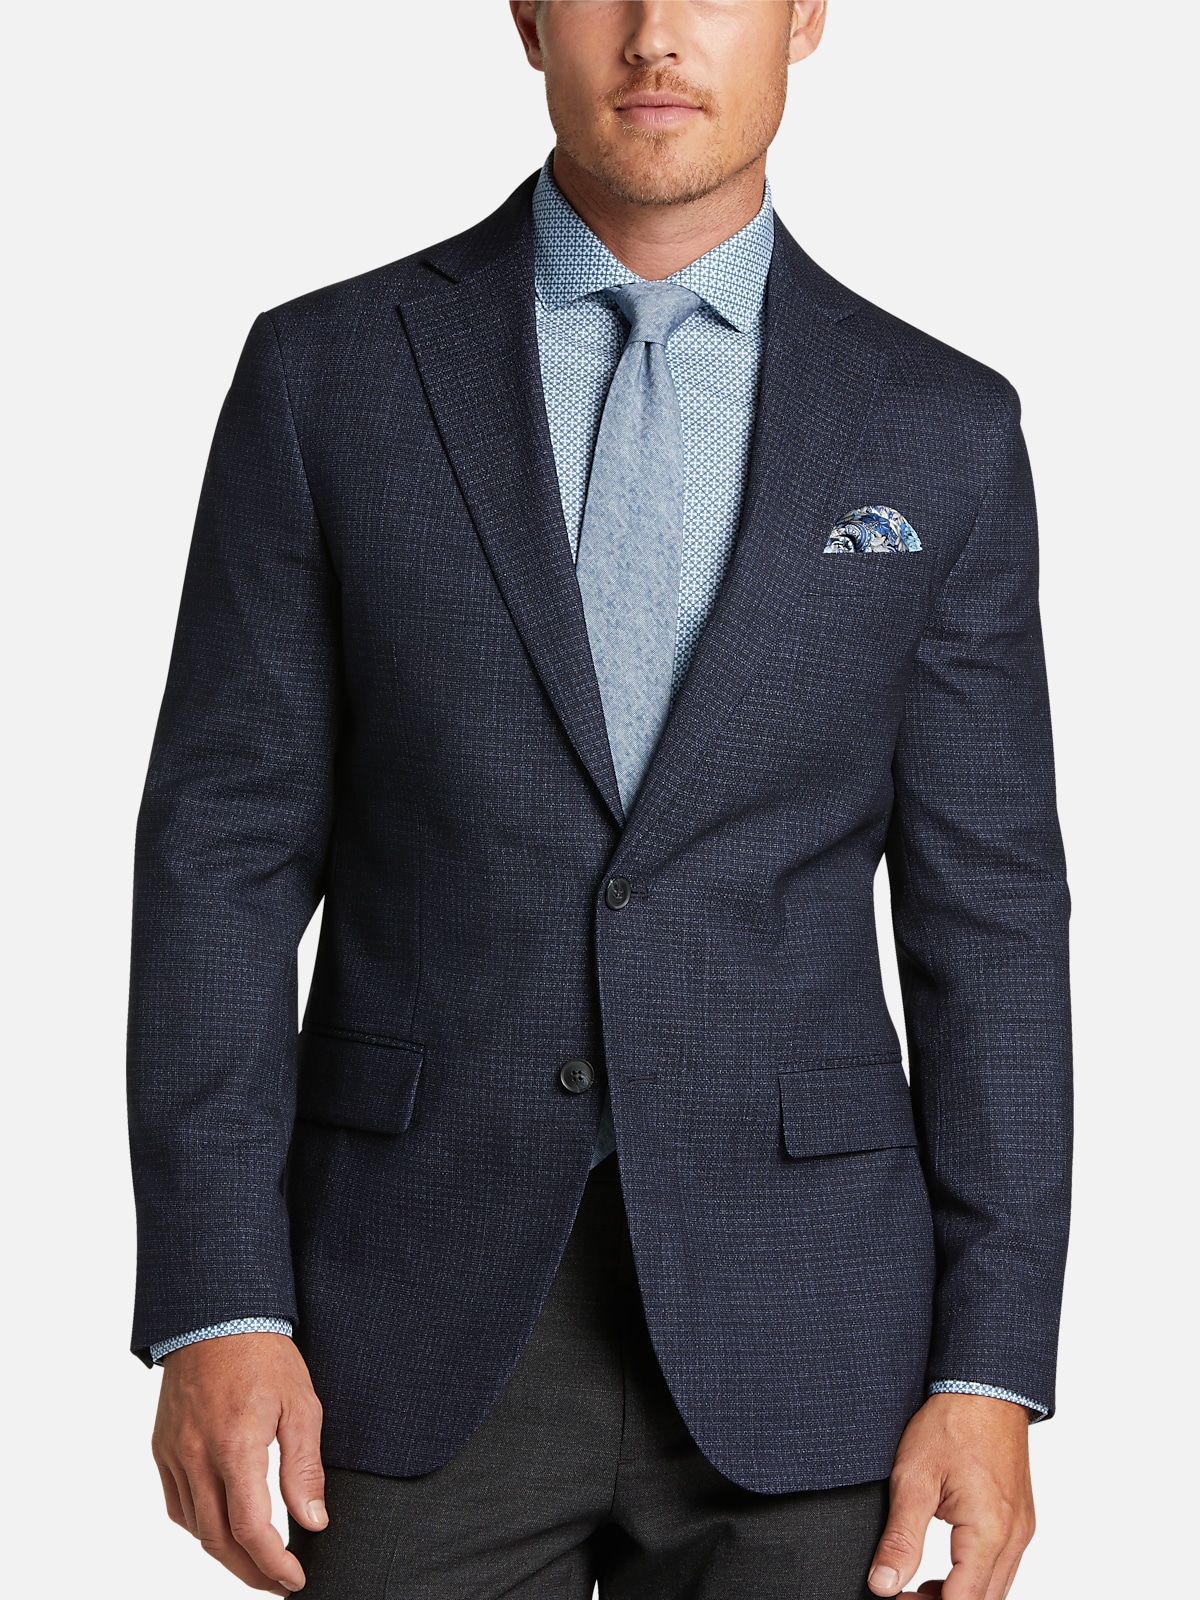 Awearness Kenneth Cole Modern Fit Sport Coat | All Clearance $39.99 ...